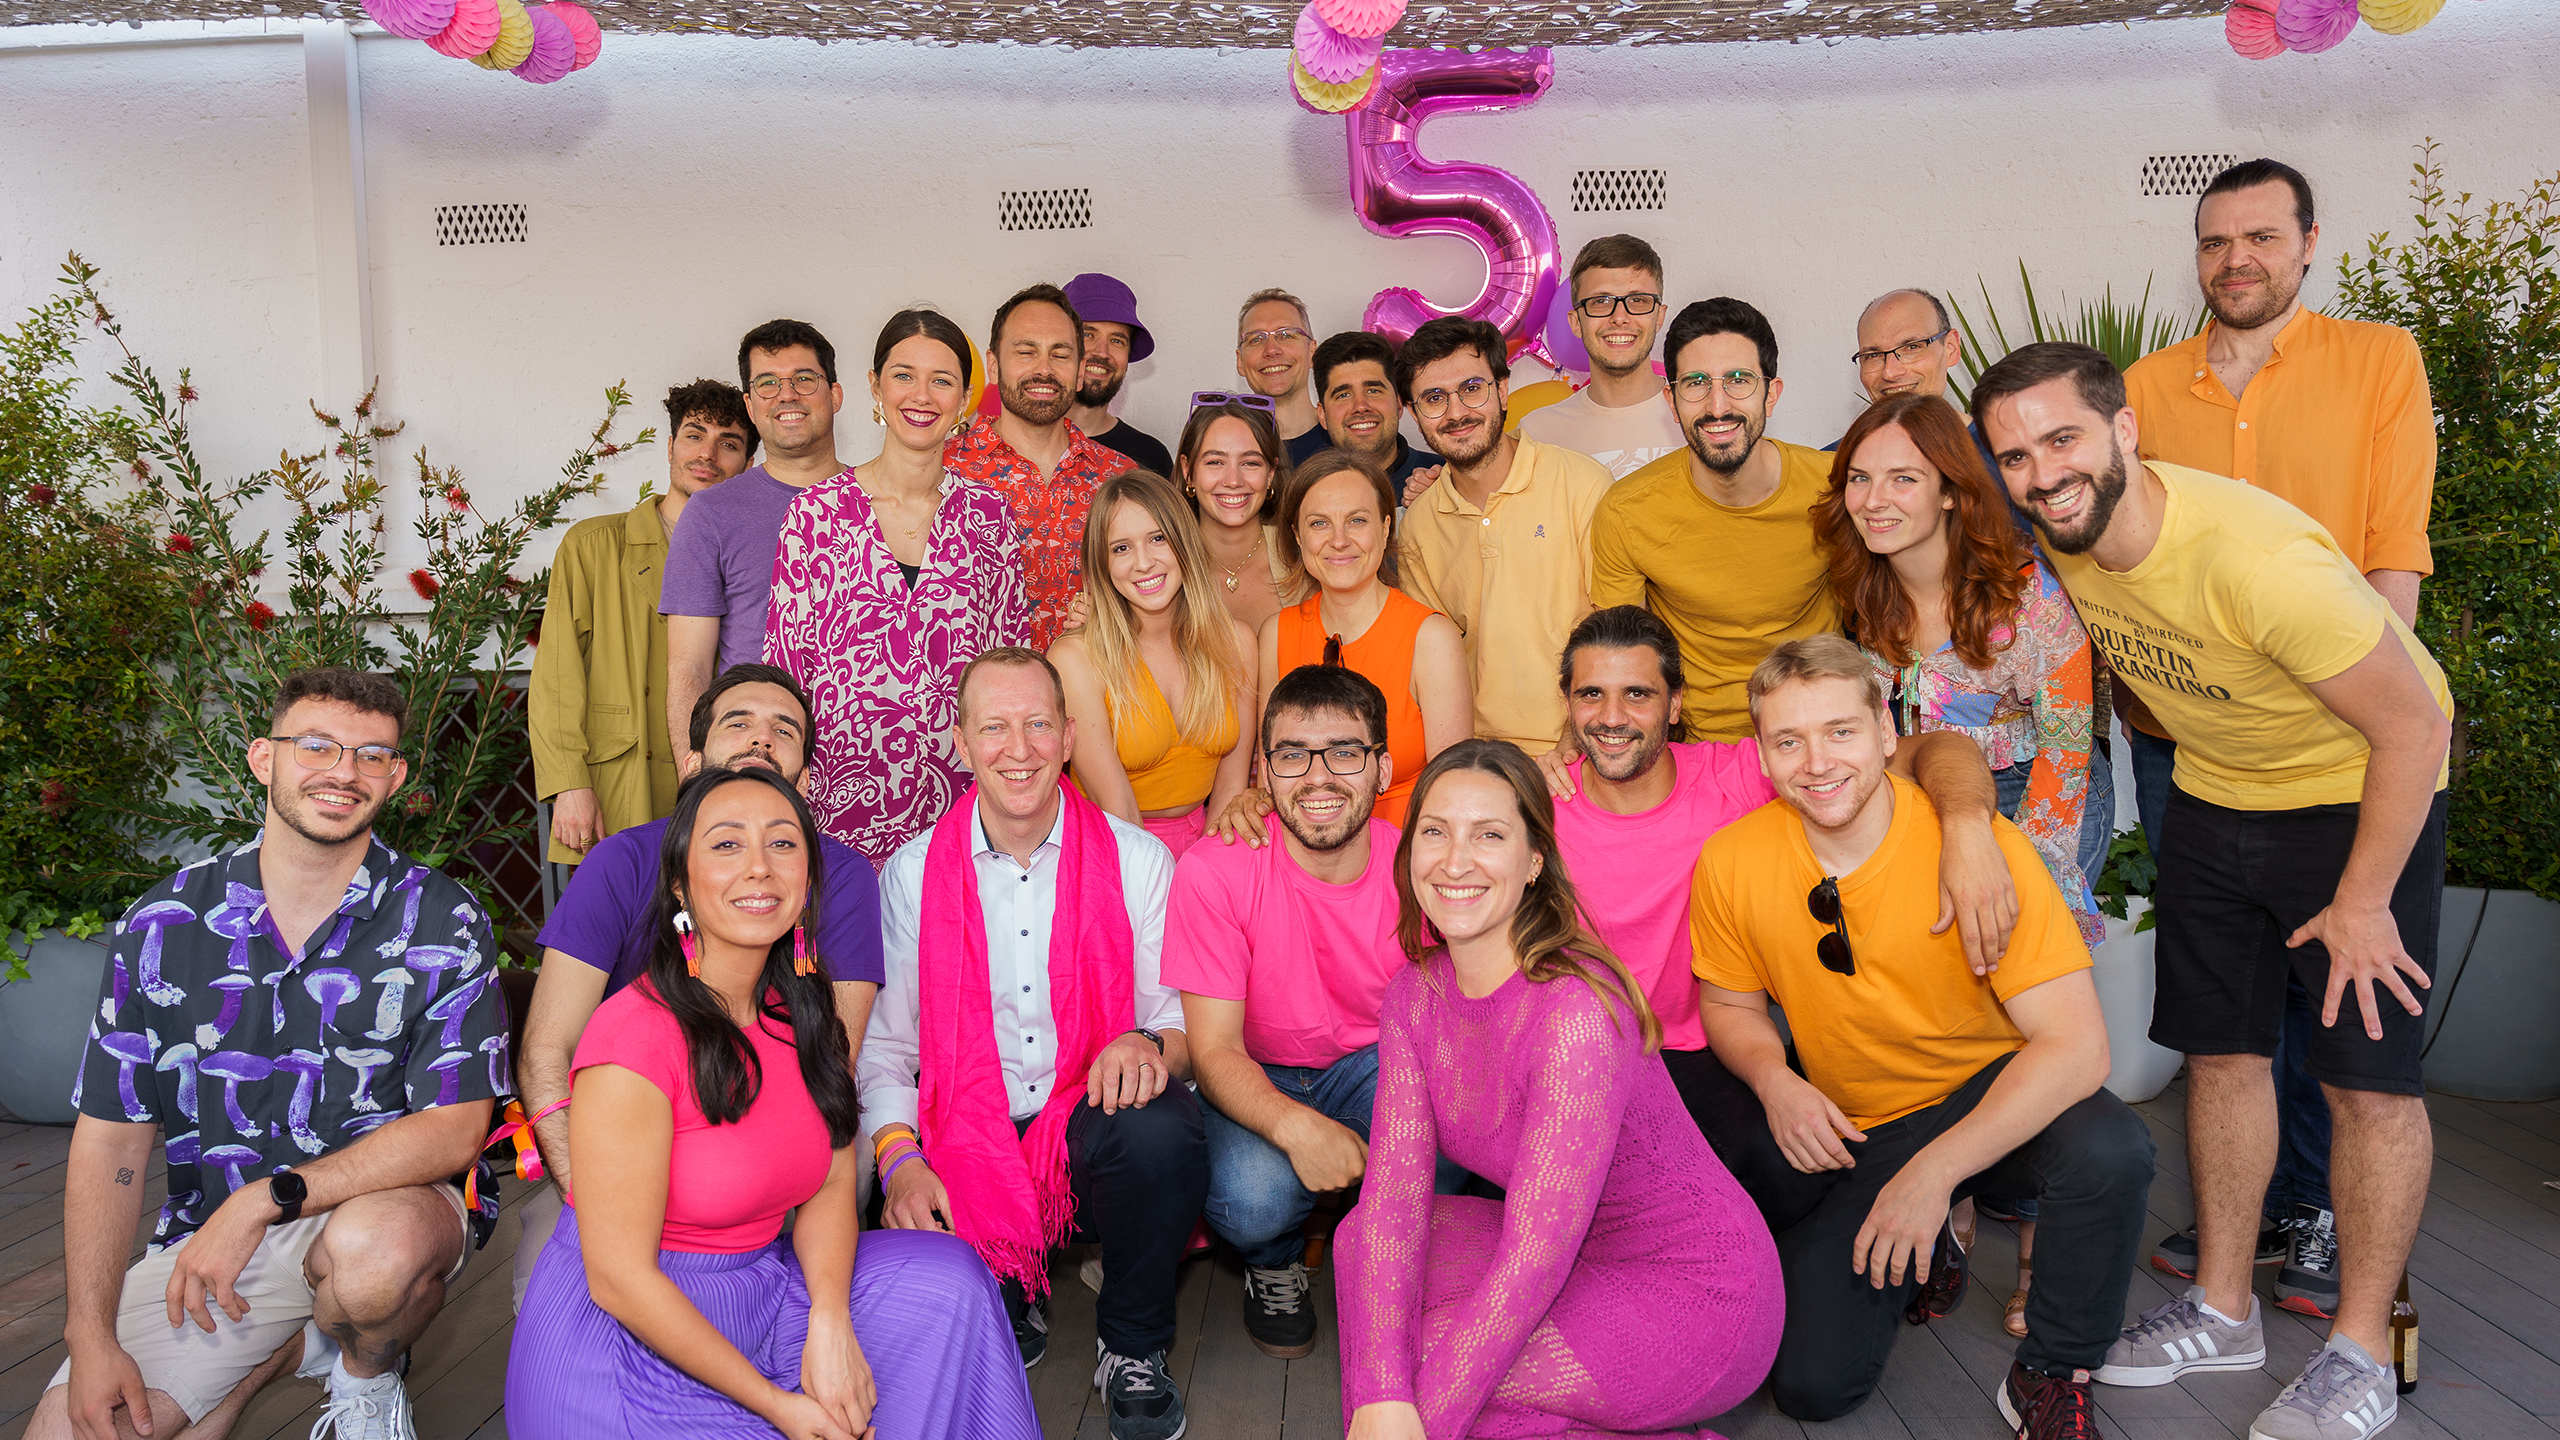 Team picture on a terrace with people dressed in pink, purple and orange